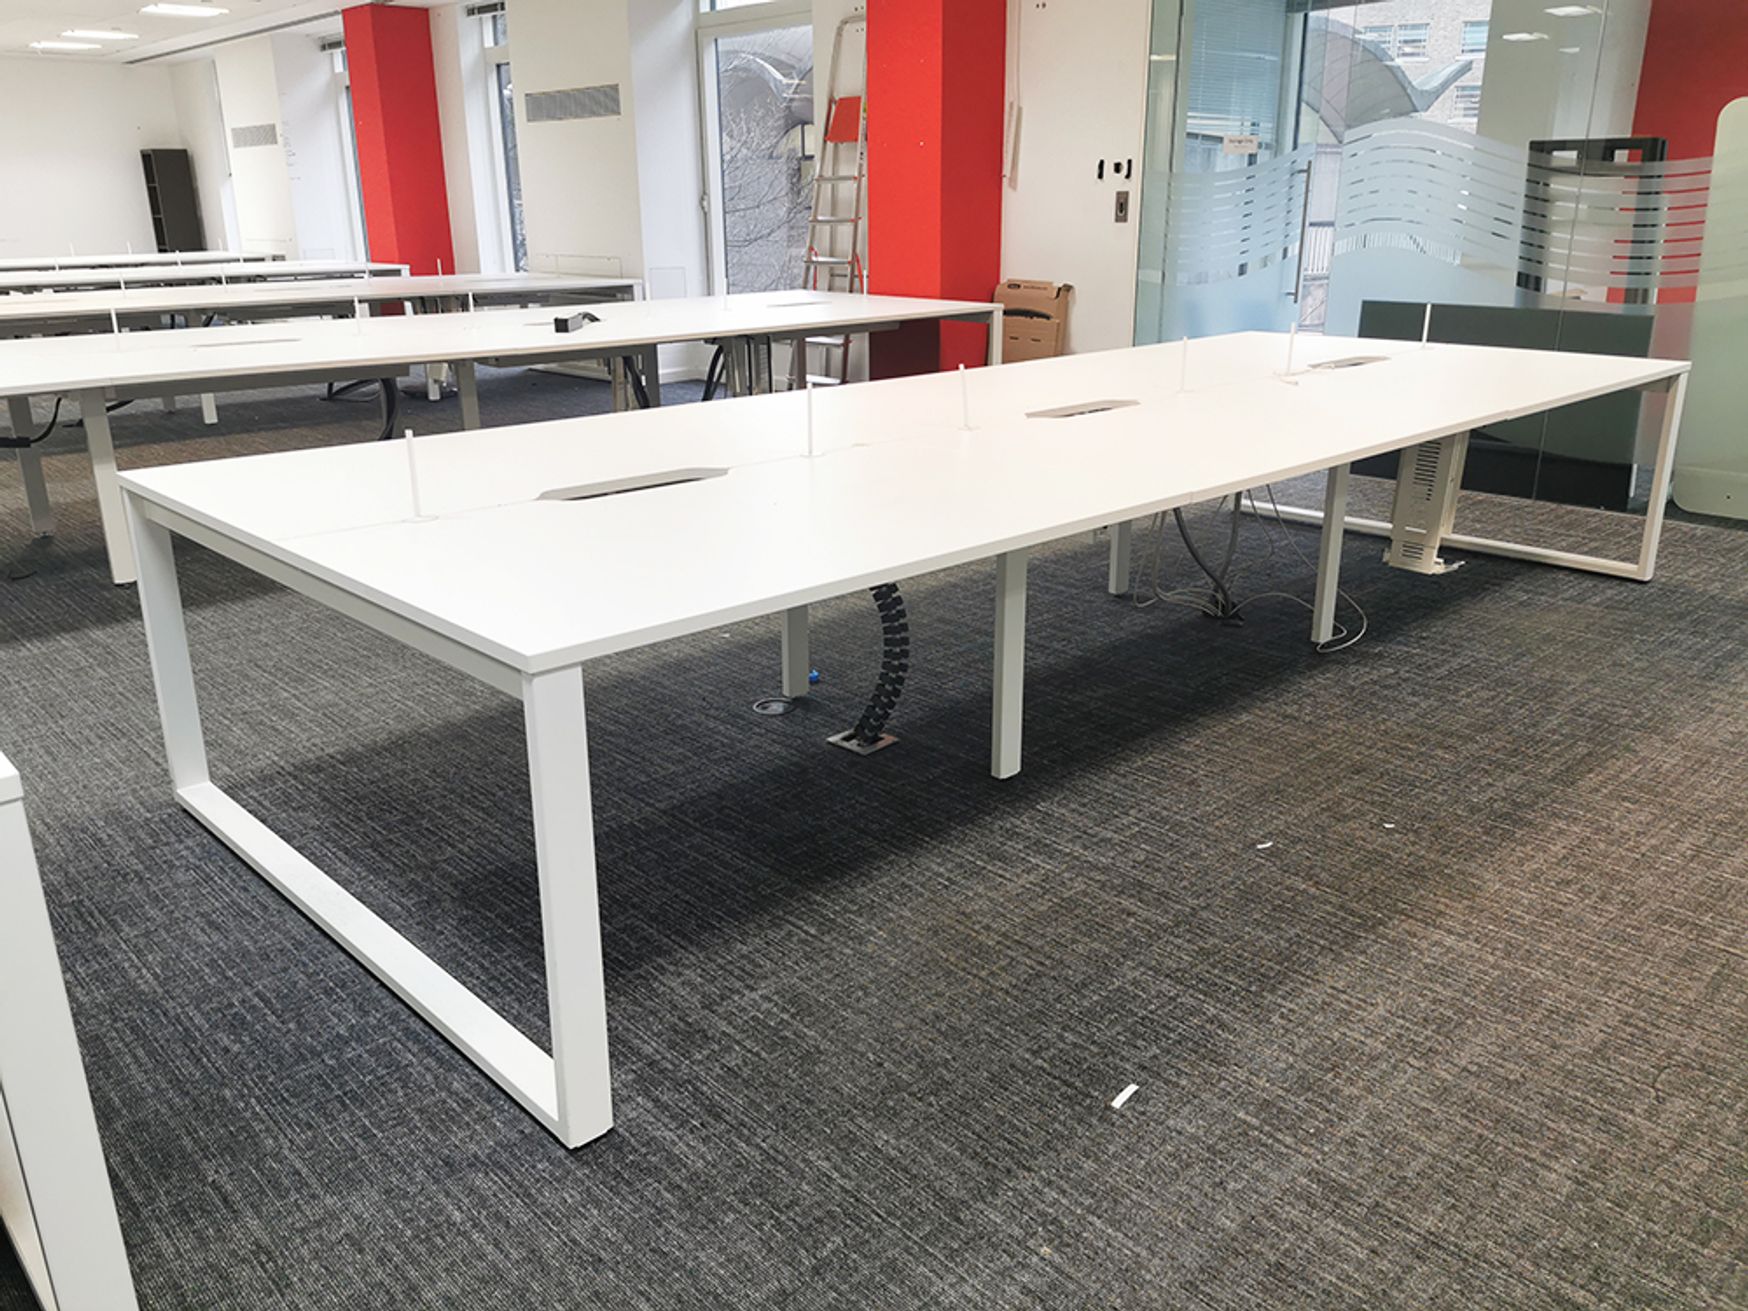 Used 1400mm White Bench Desks available with Red Screens